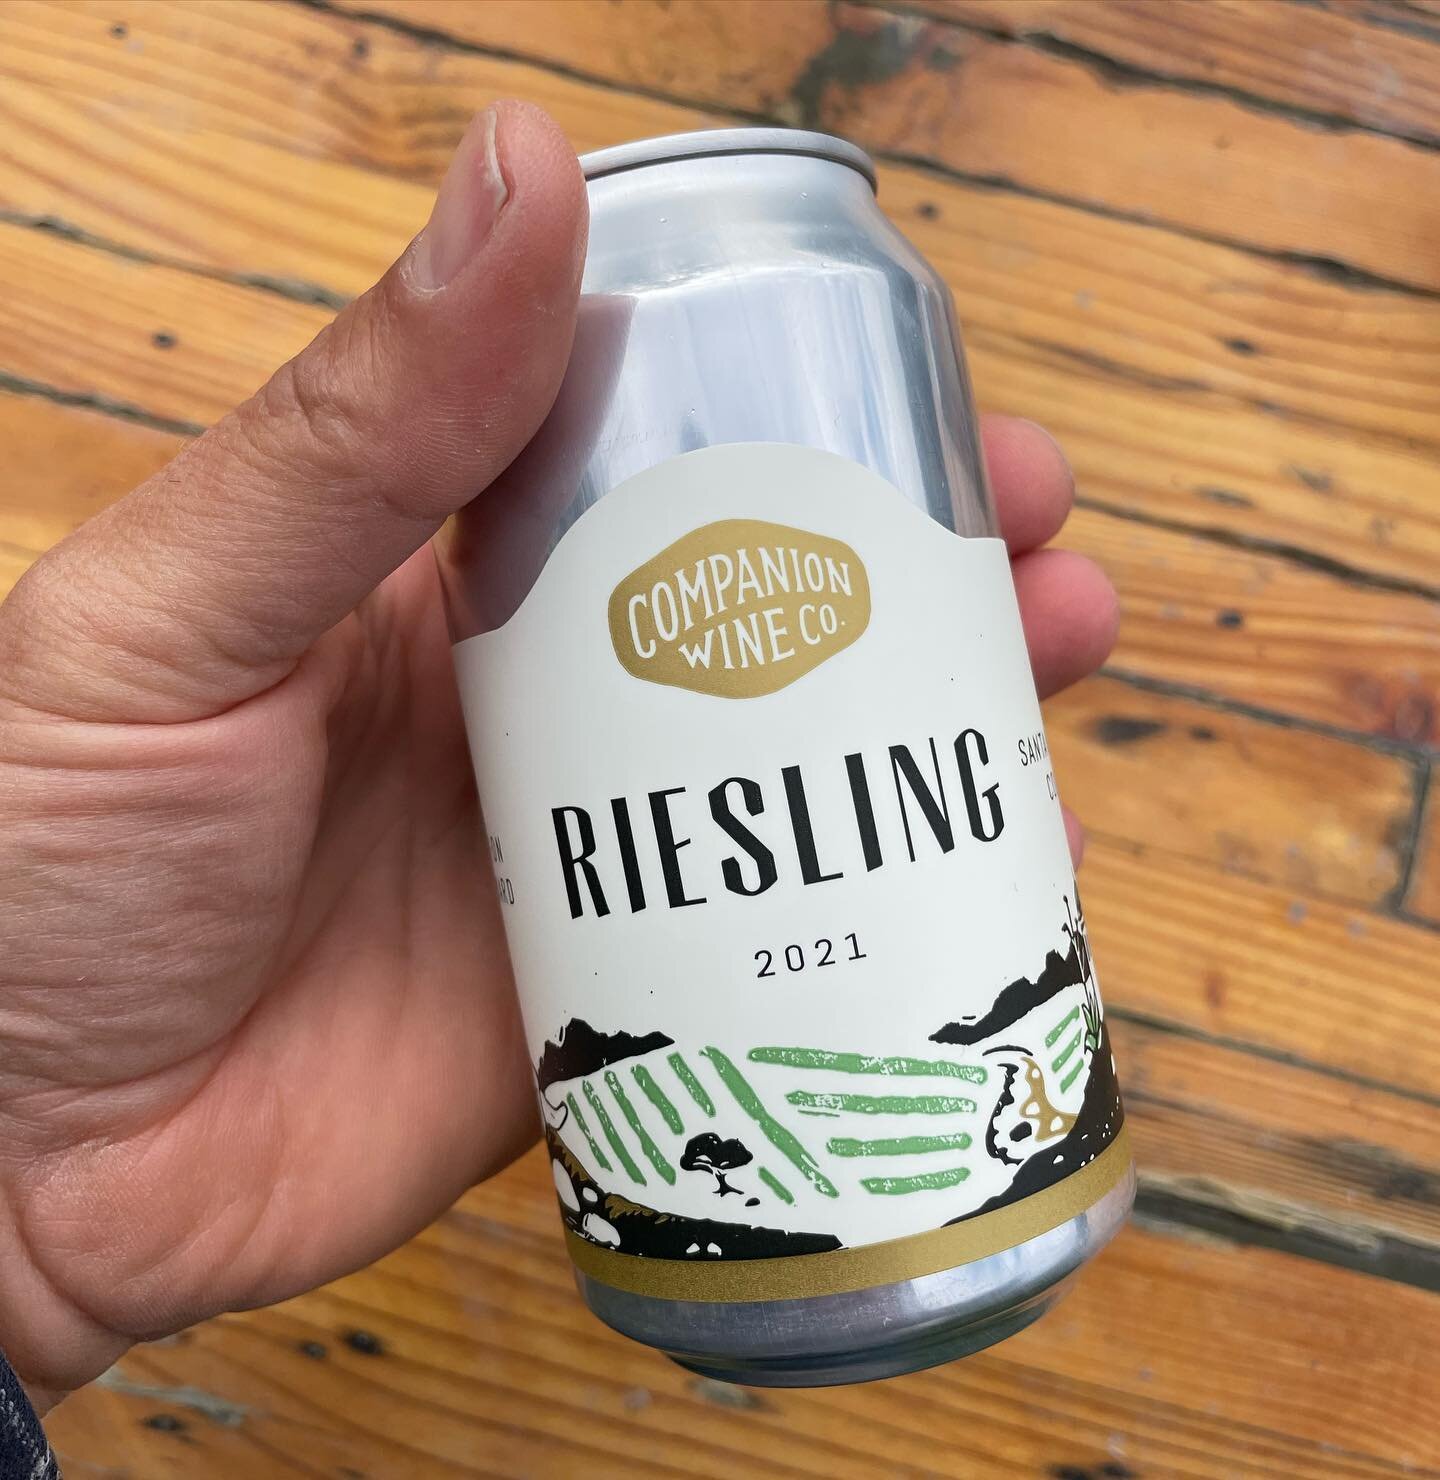 Summery sundays and kick-on Riesling are made for each other. We made very little of this wine, so if you find it in the wild get it while it&rsquo;s getting gooood.

#errrydayimriesling #arieslingtolive #cannedwine